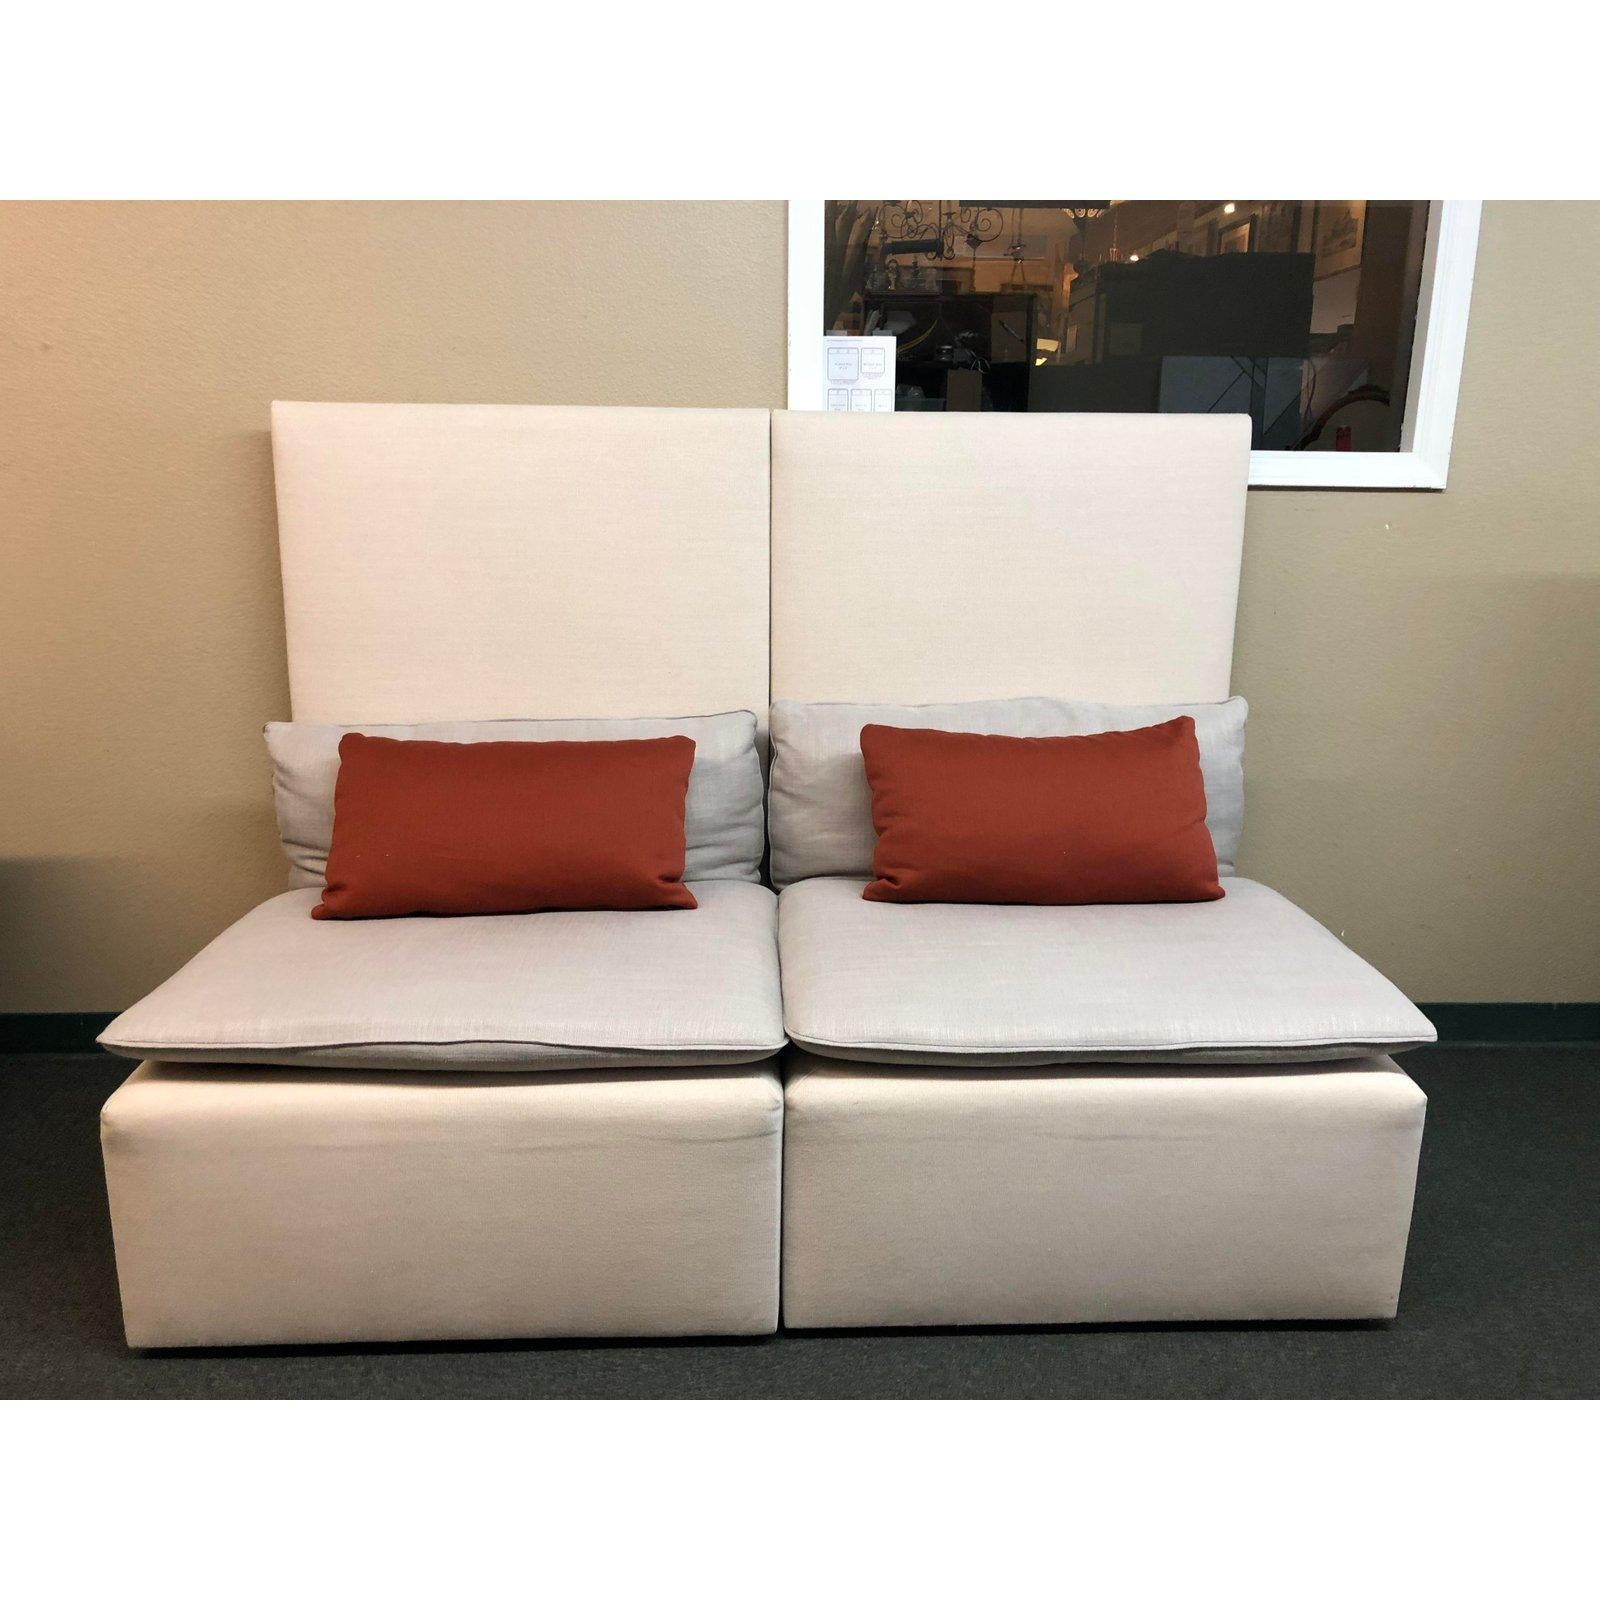 A modern modular sofa. Unique in its high back and monotone hues (ivory/gray), this five piece can be reconfigured in many ways to suit your space. Cushion filling sis 50/50 foam/down, the upholstery is a linen blend with contrasting orange decor